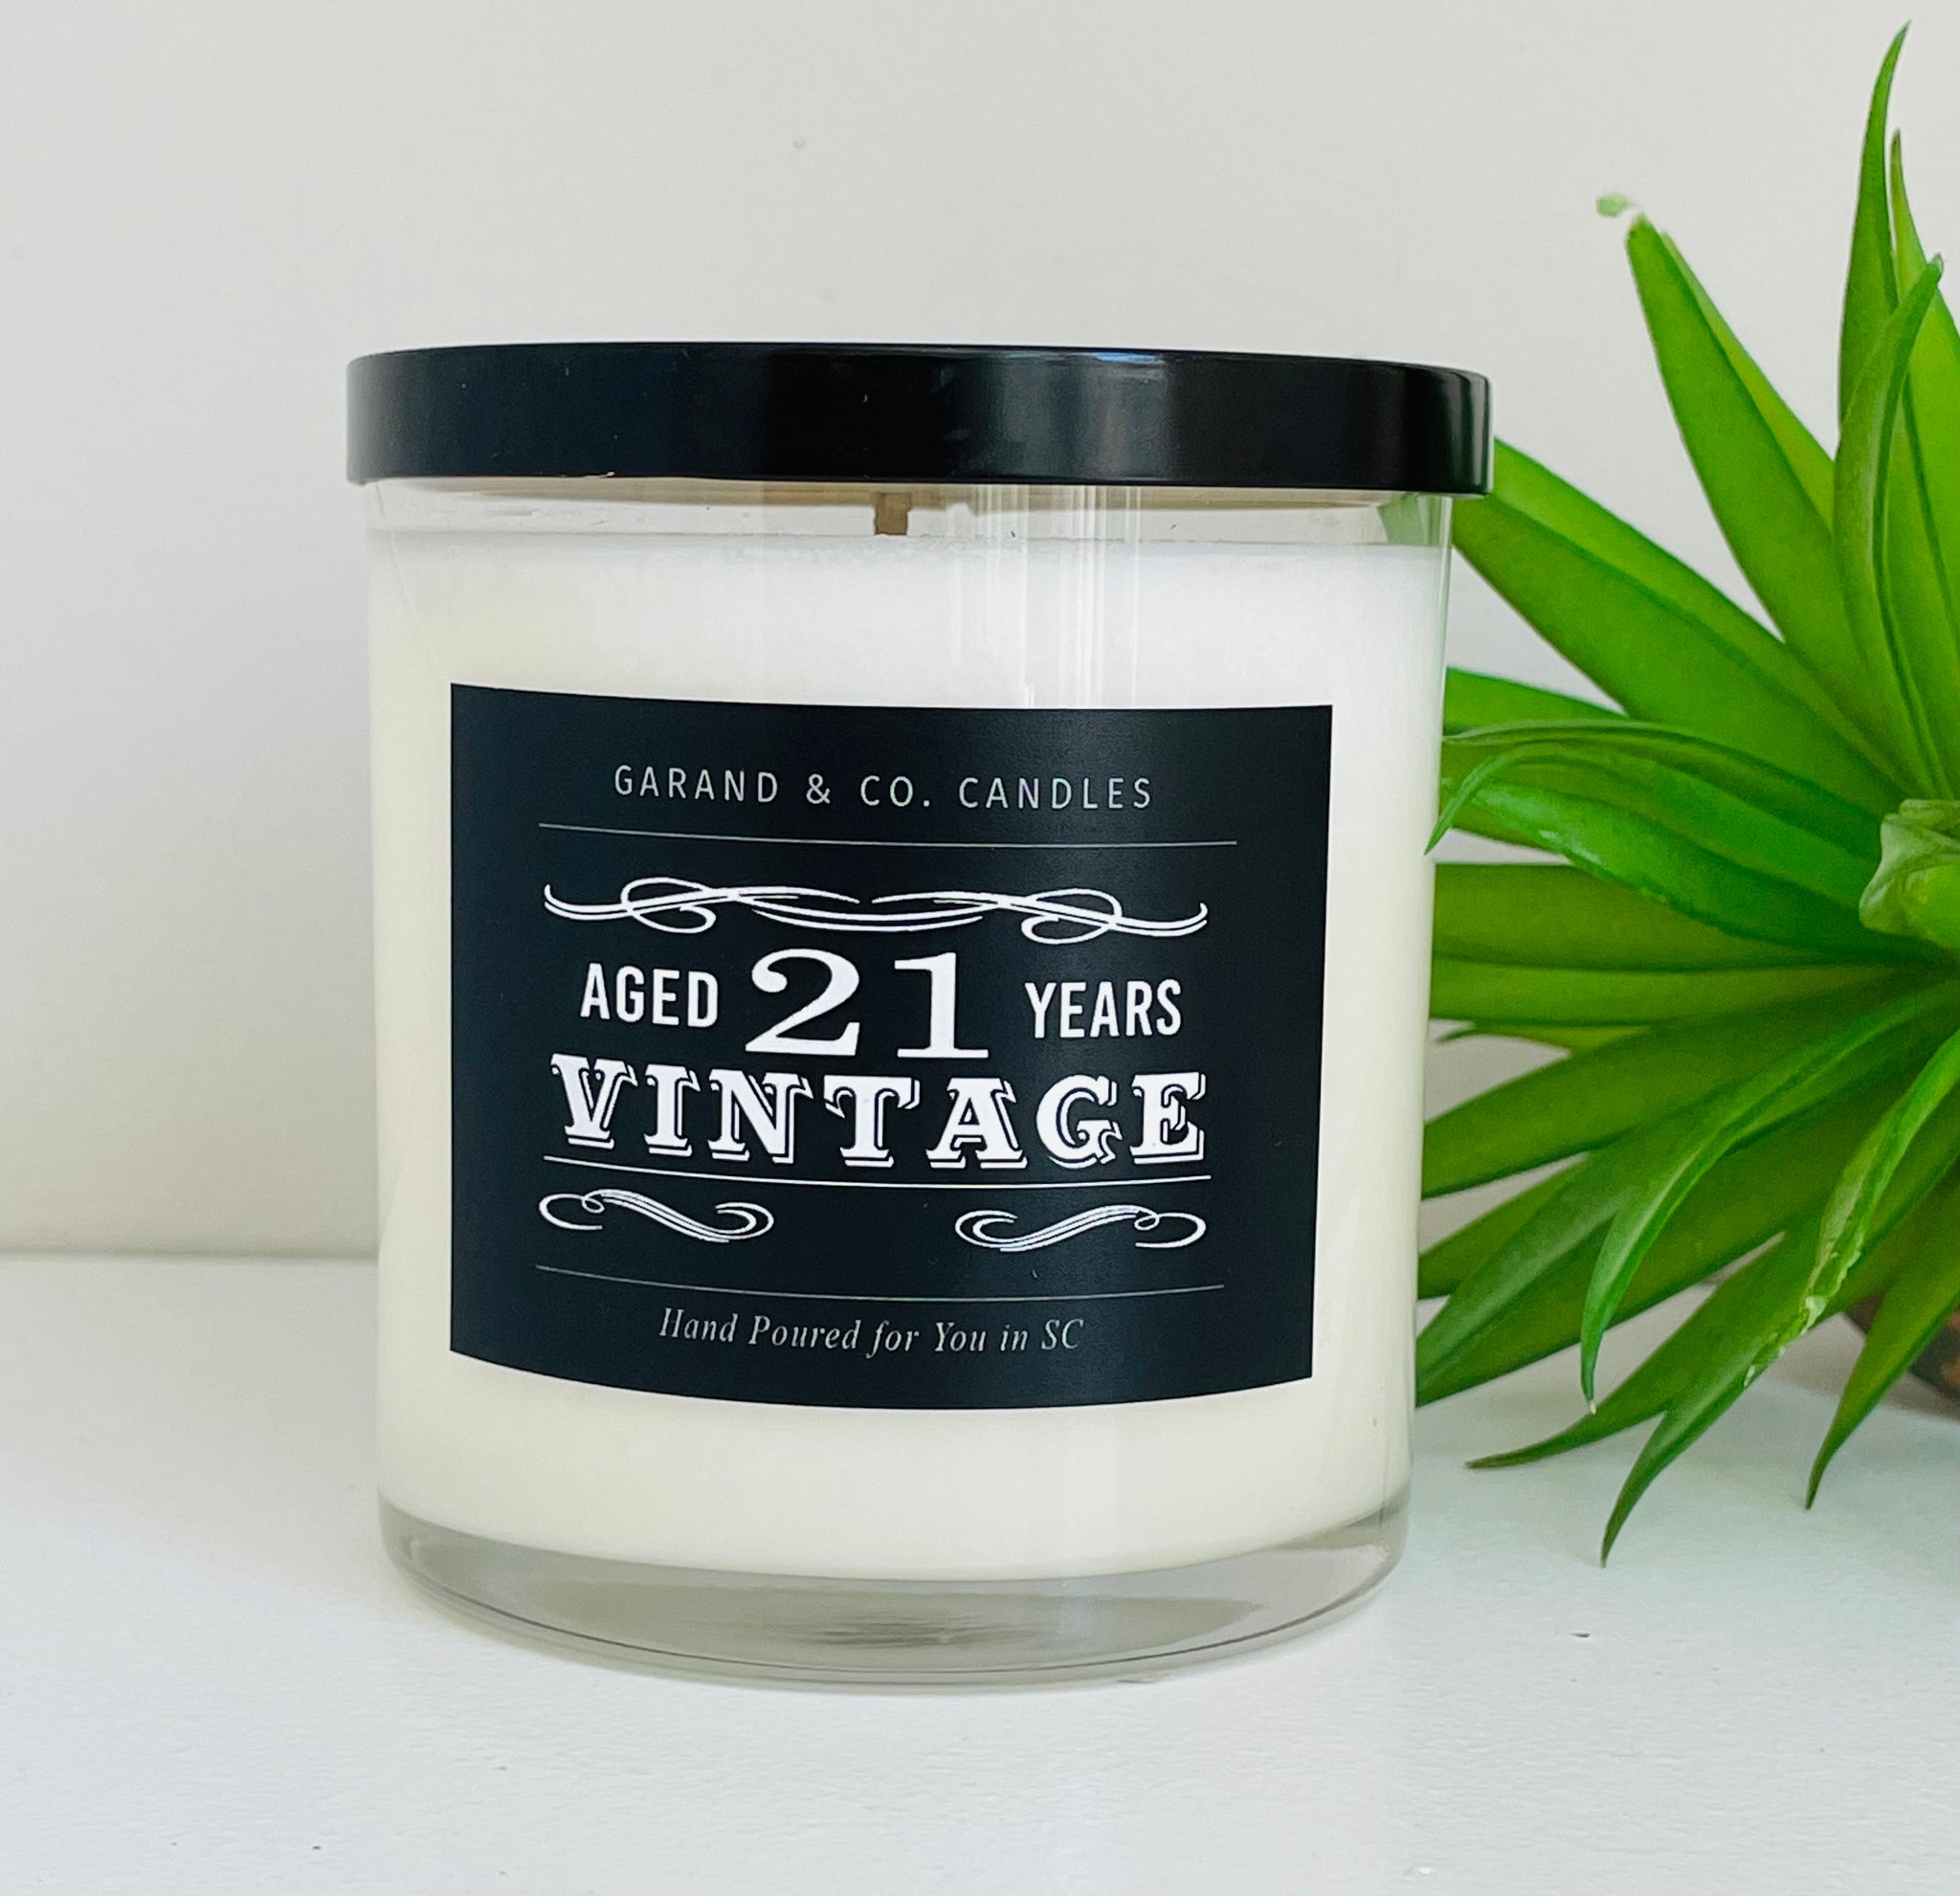 12 oz Clear Glass Jar Candle - "Vintage" 21st Birthday Candle